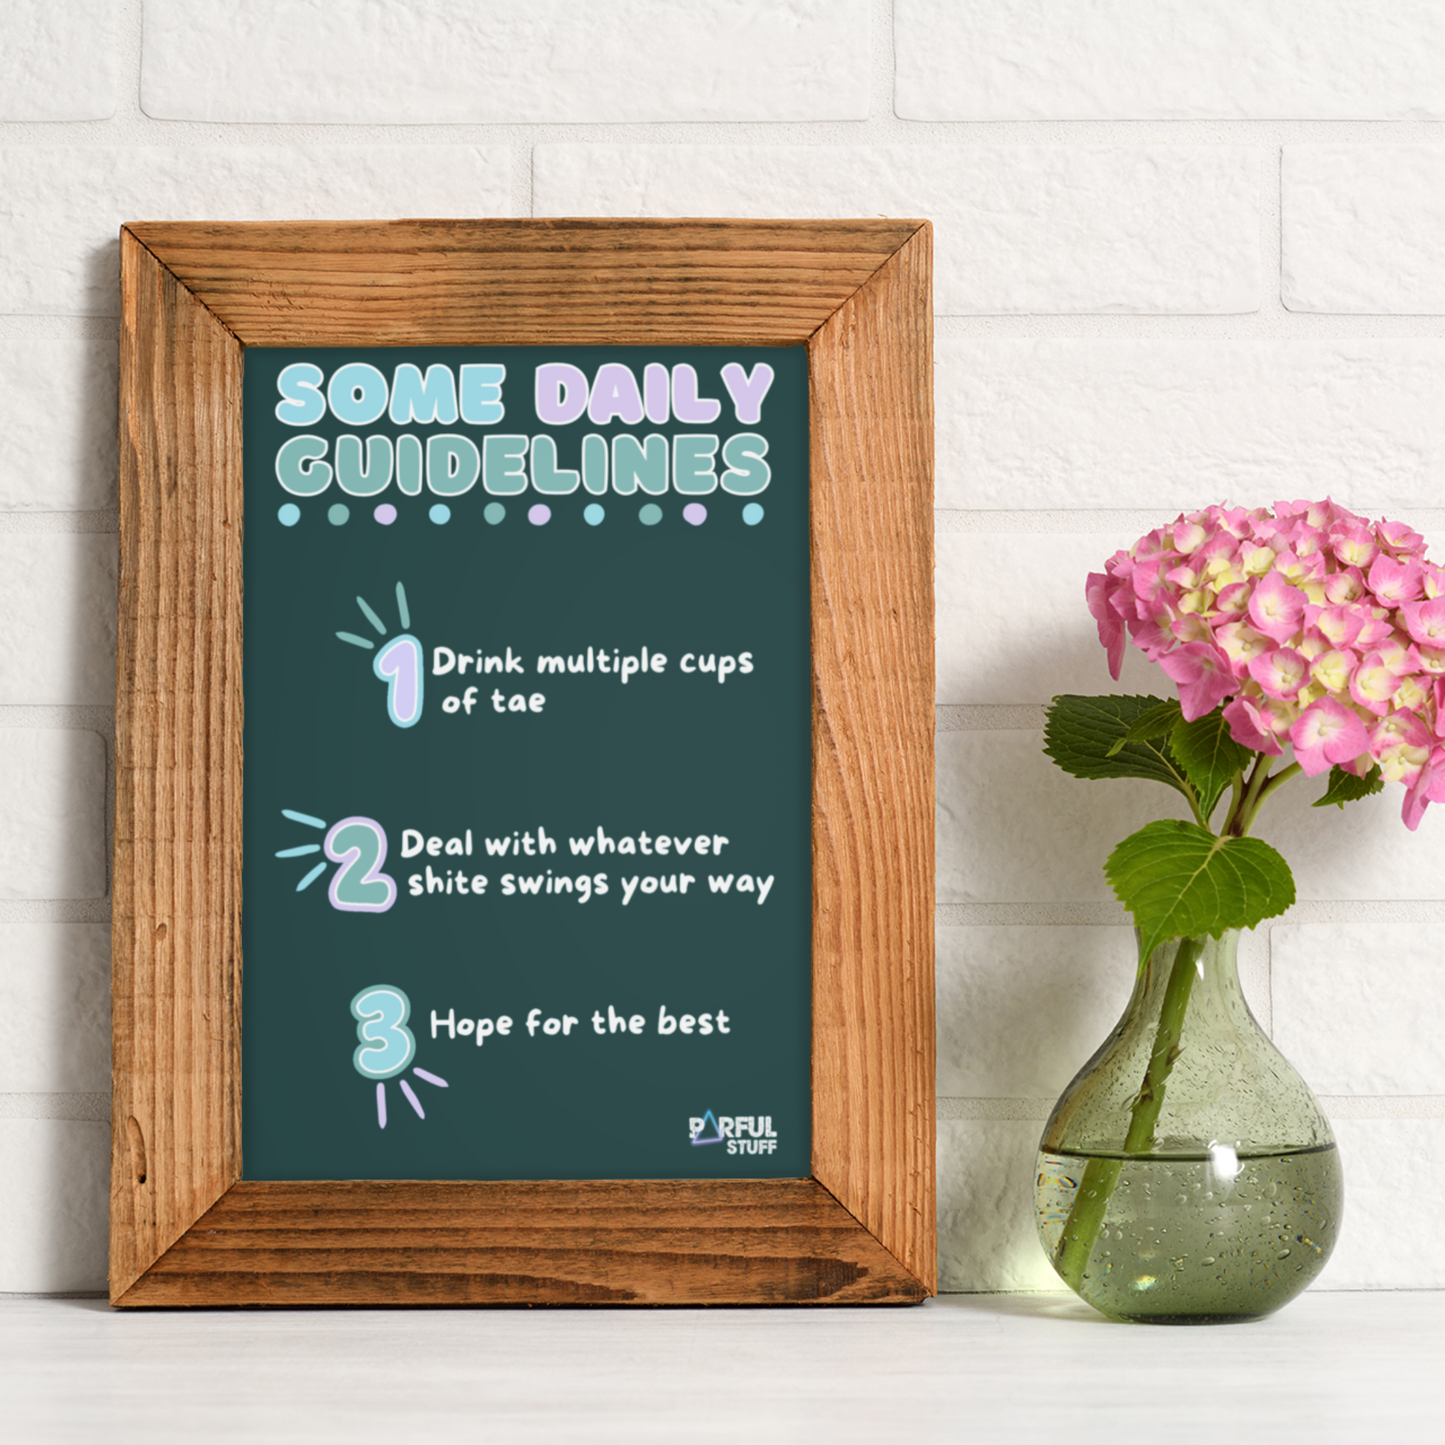 3 DAILY GUIDELINES PRINT